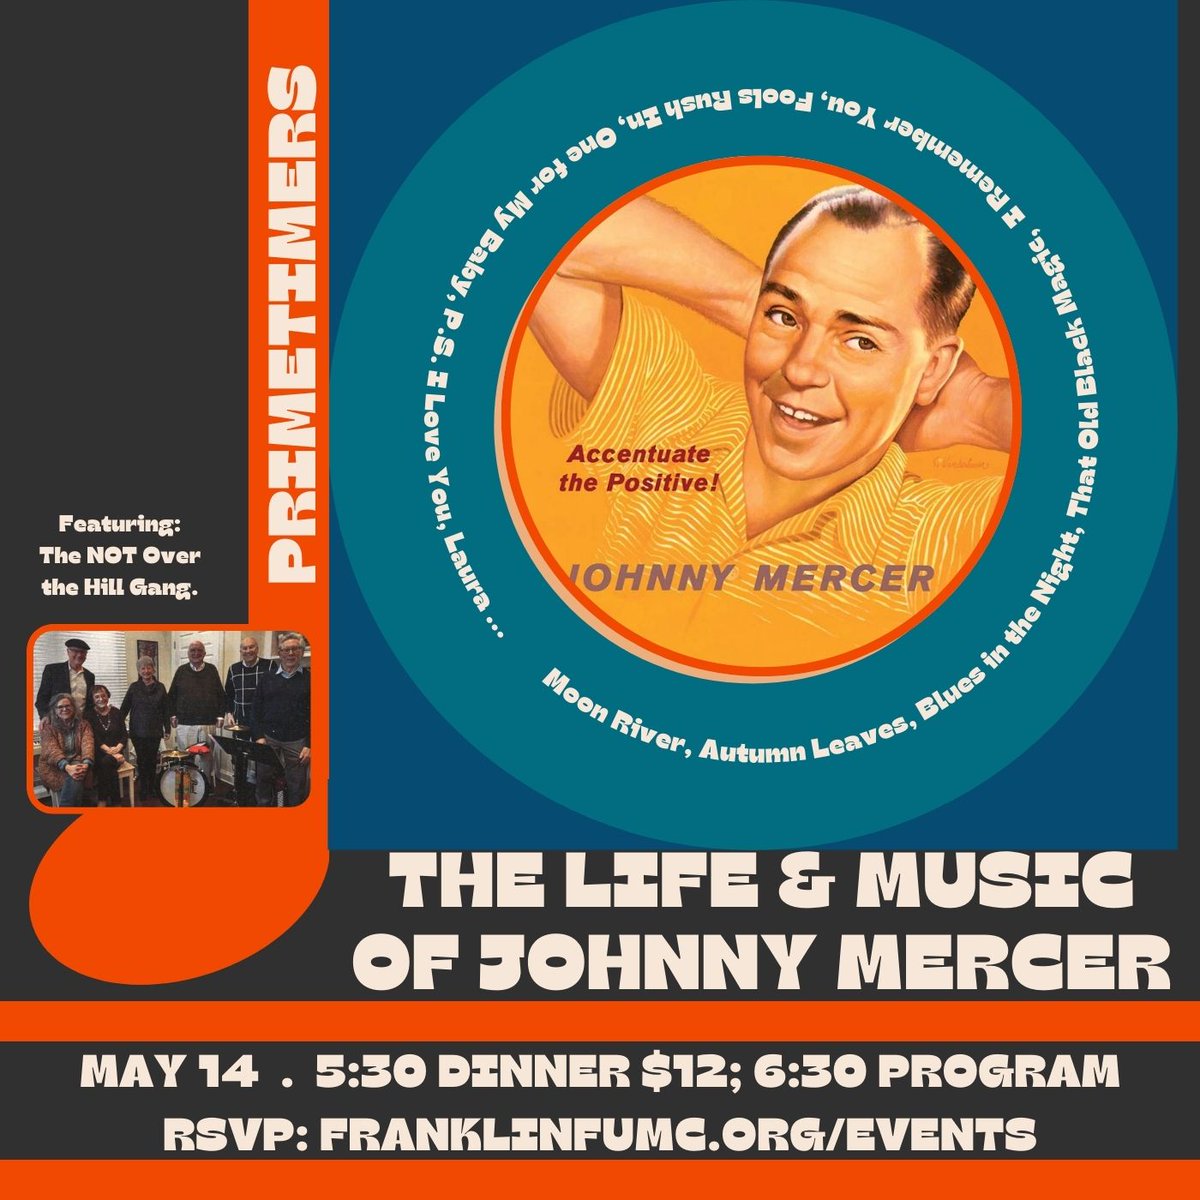 🎶 Let's travel back in time and groove to the timeless tunes of Johnny Mercer at Primetimers in May! From 'Moon River' to 'That Old Black Magic', his music always brings the joy of yesteryears. Join us for a toe-tapping good time! 🎵✨ #JohnnyMercer #Primetimers #GoldenOldies'